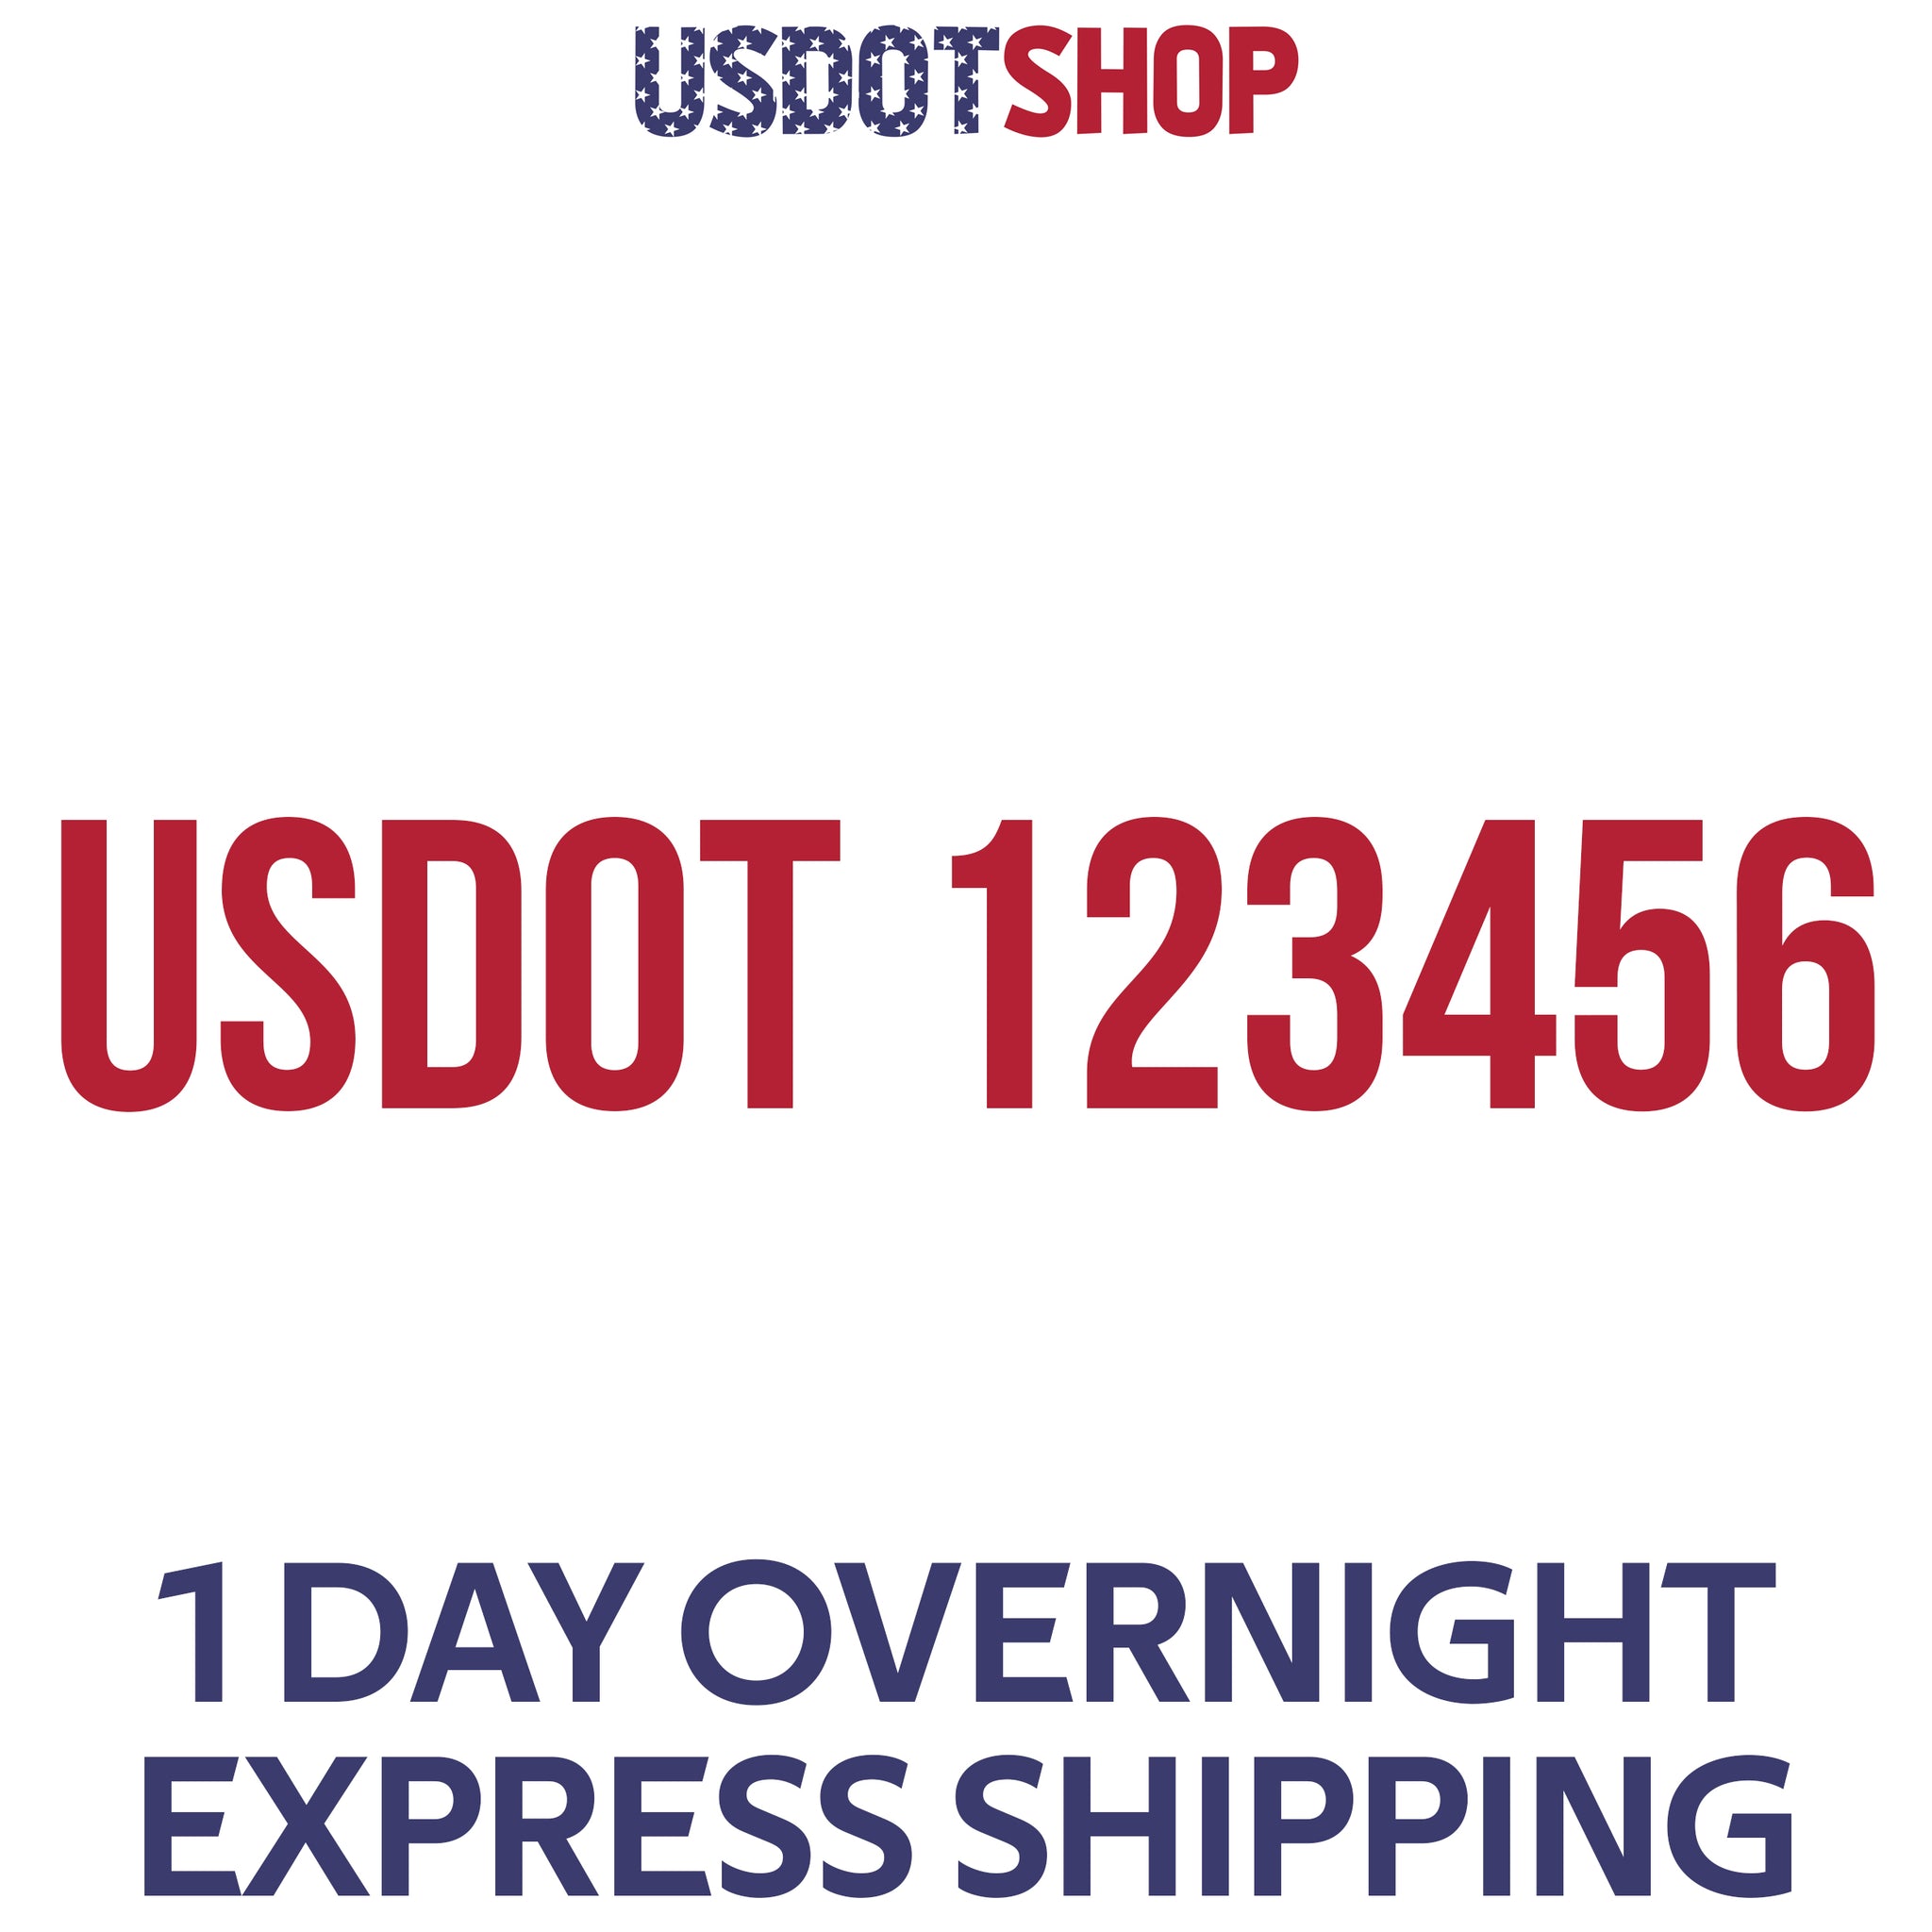 usdot number decal sticker 1 day overnight express shipping